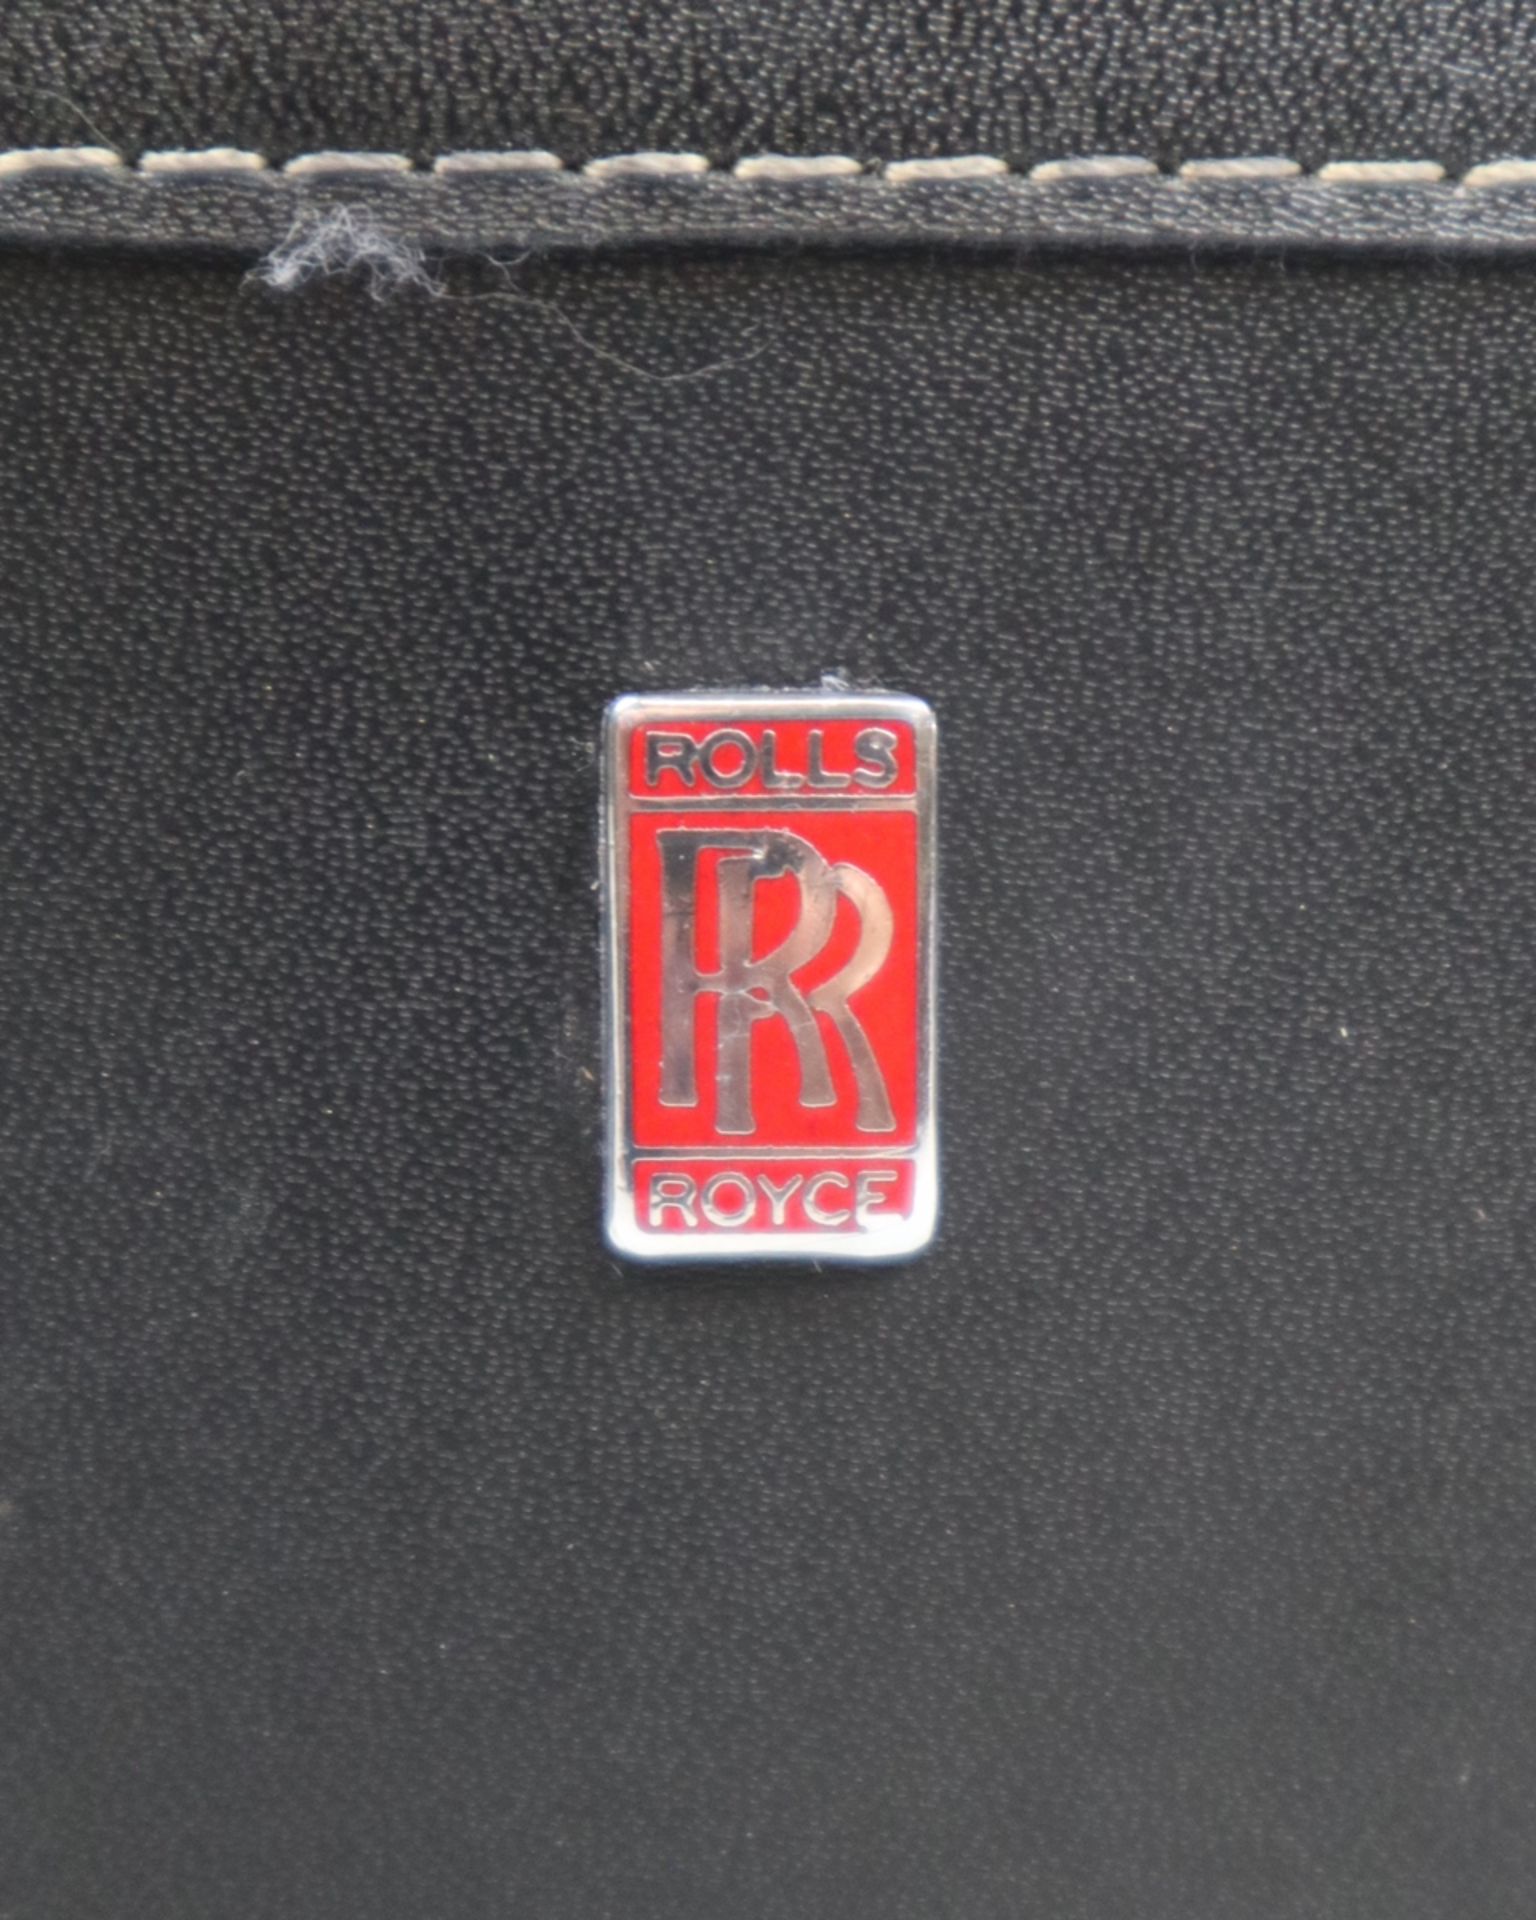 Rolls Royce 1979 L/E leather covered hip flask - Part of the RR range to celebrate 75 years - Image 3 of 4